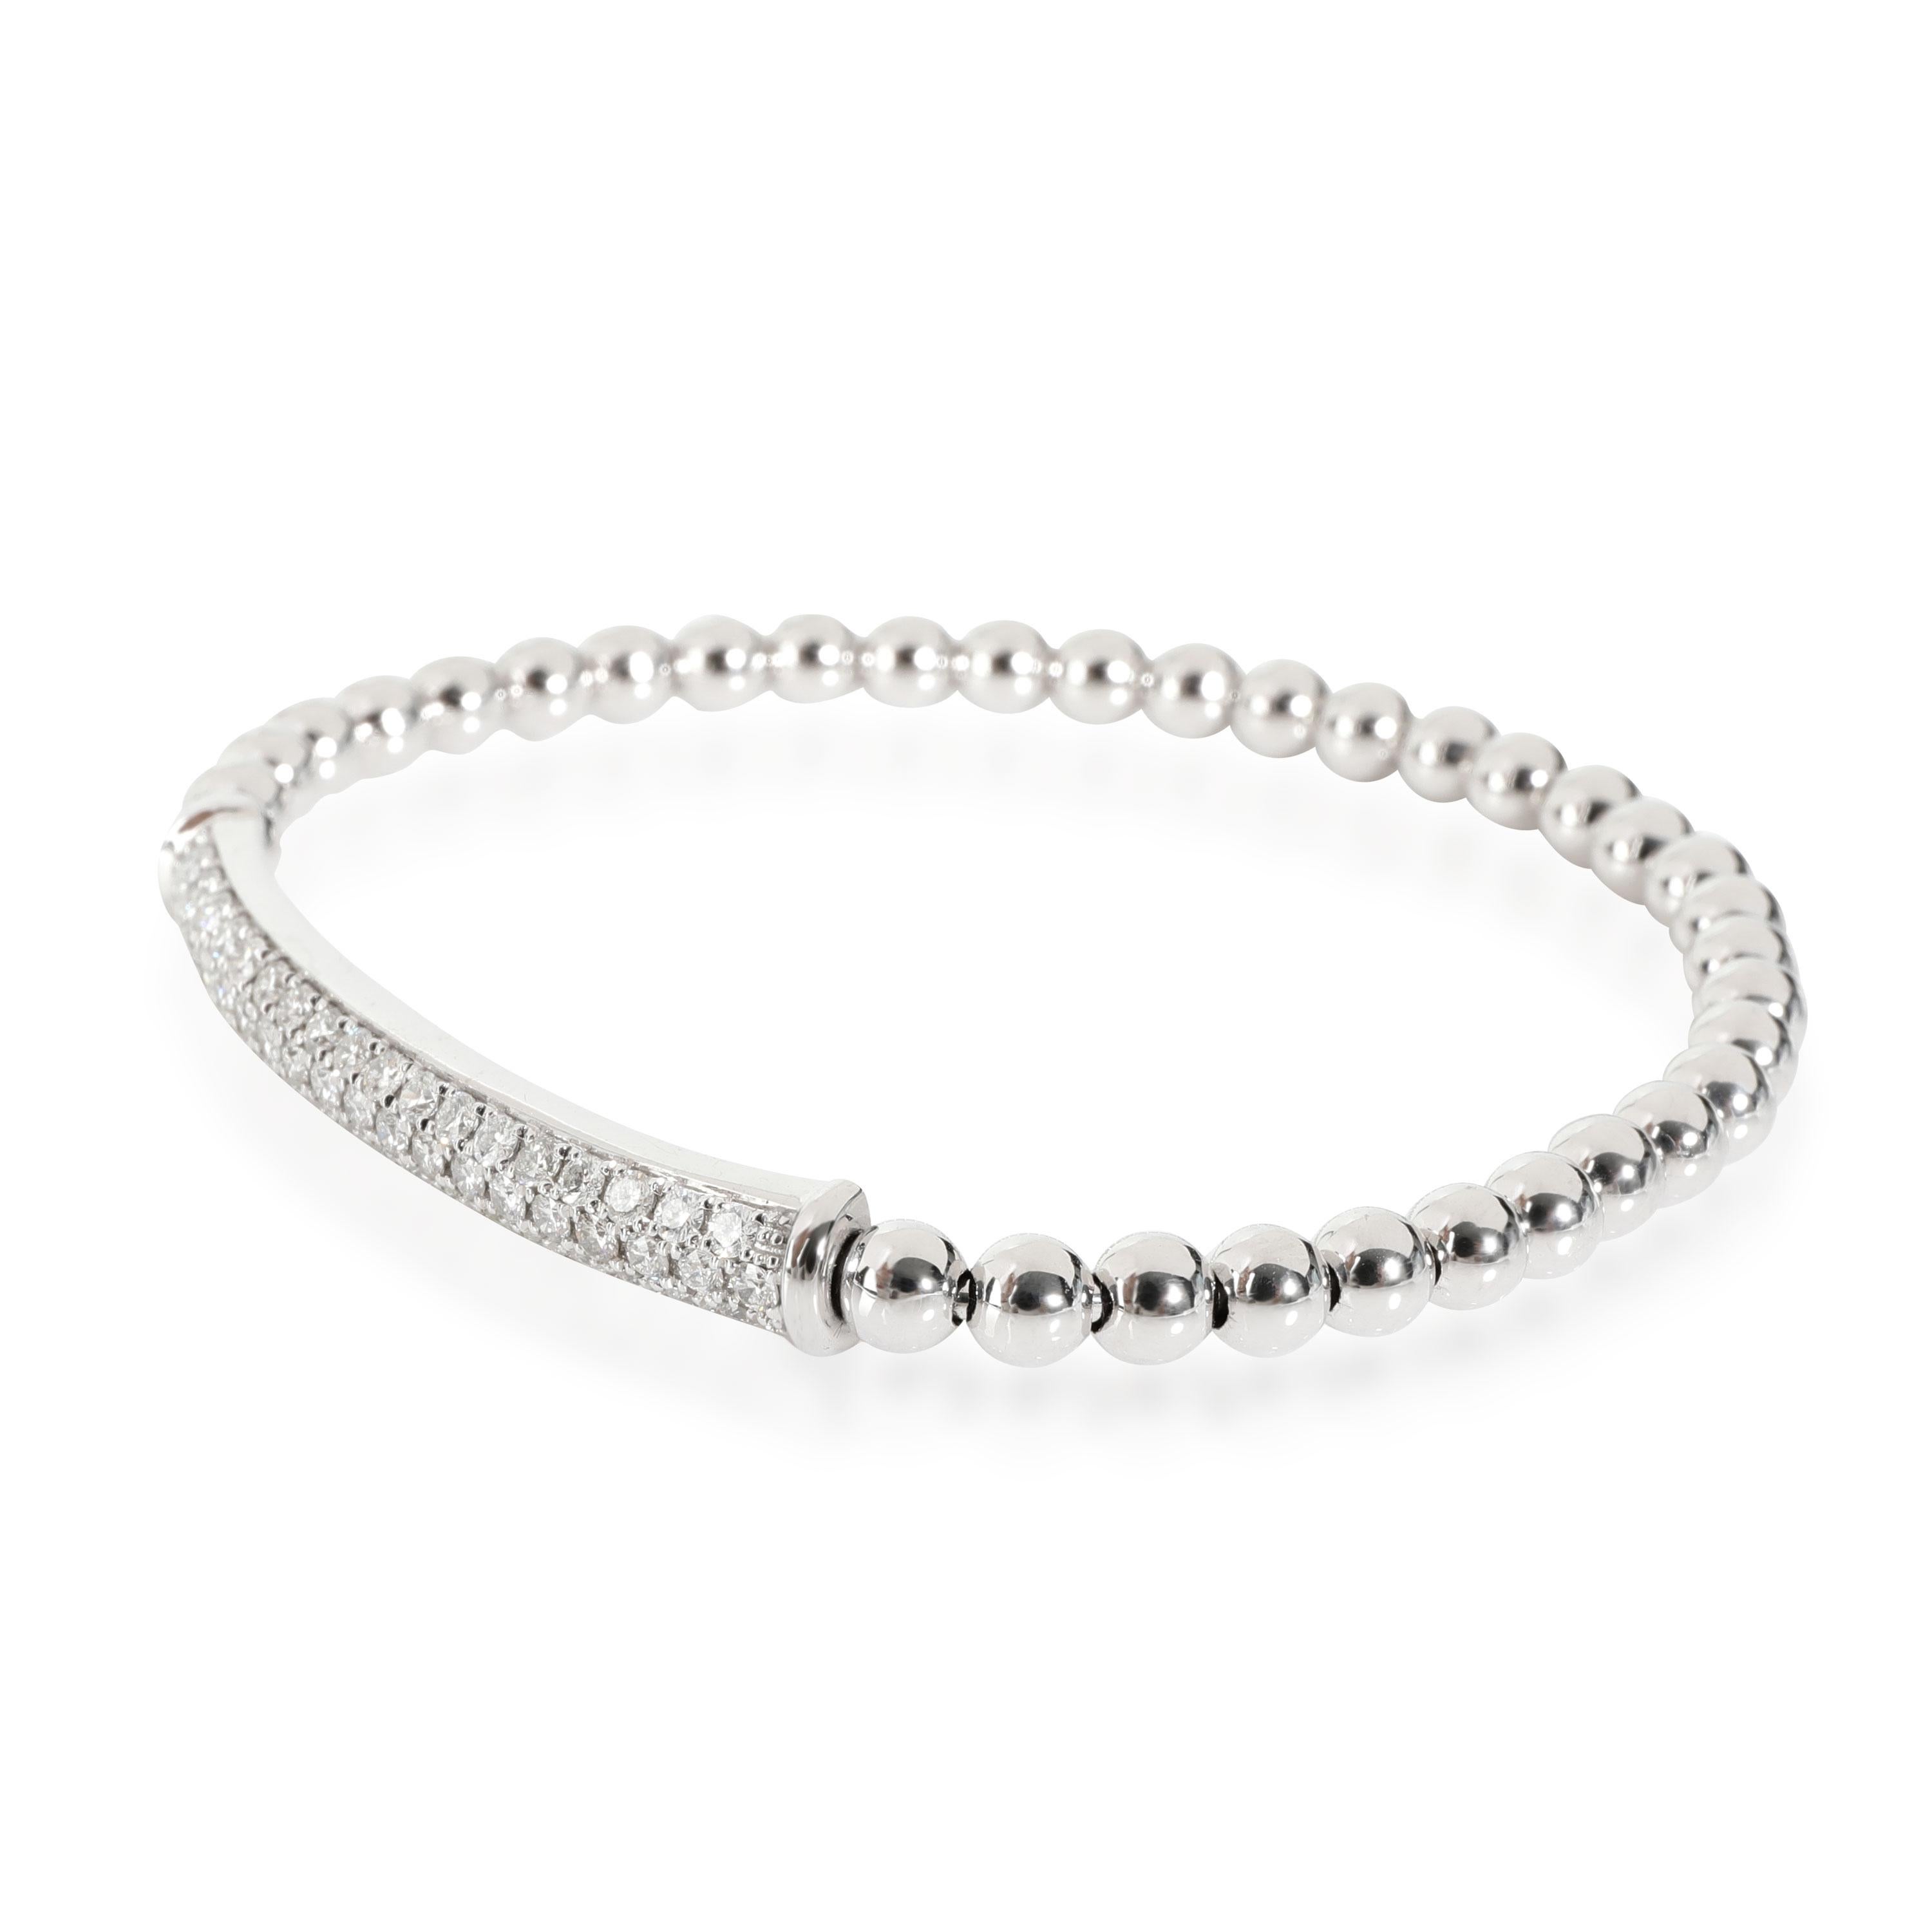 Pave Diamond Bead Bracelet in 14K White Gold 1.16 CTW In New Condition For Sale In New York, NY